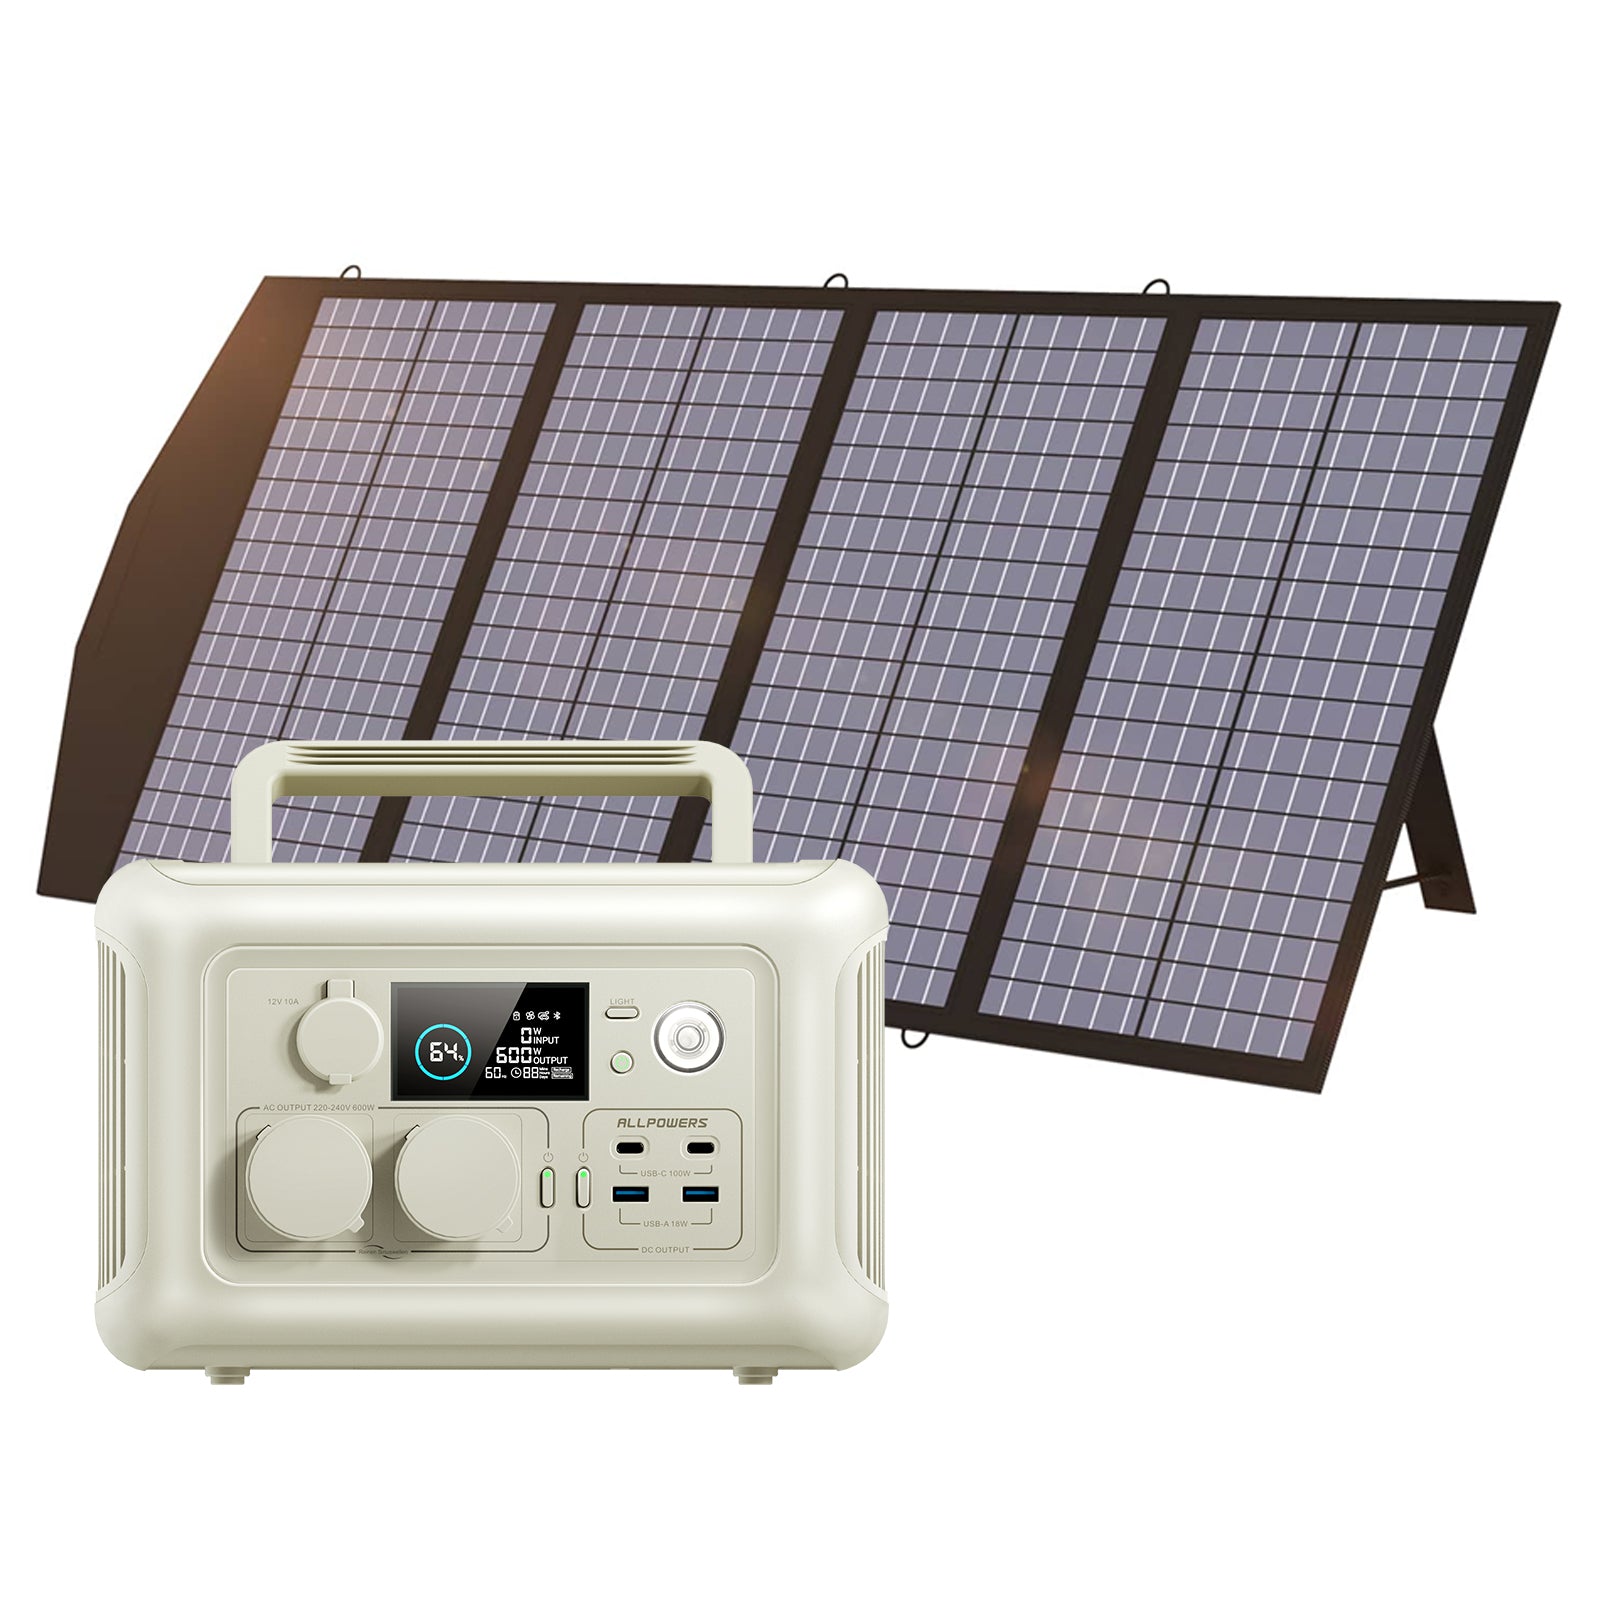 ALLPOWERS R600 Portable Power Station | 600W 299Wh